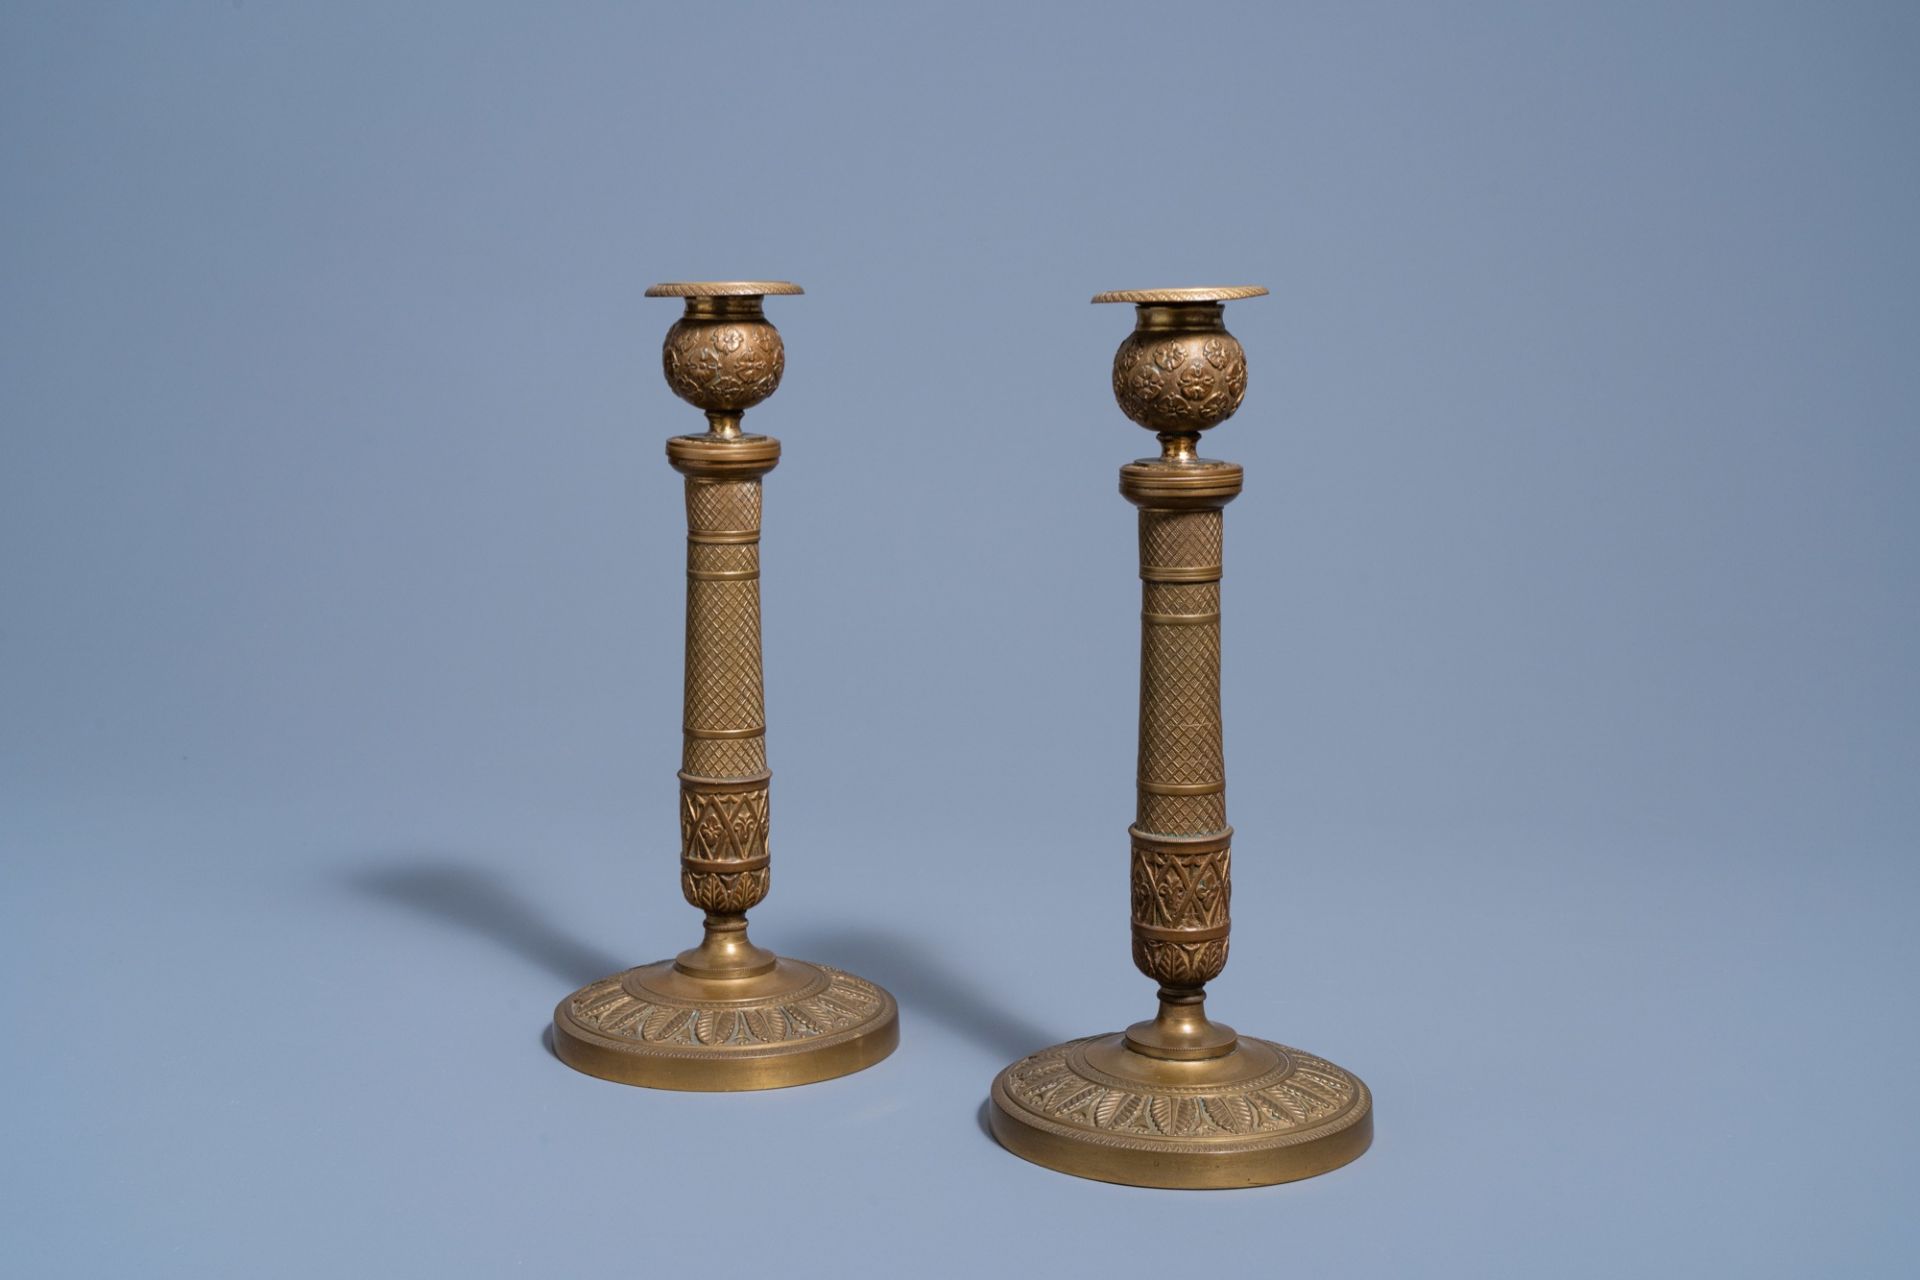 A pair of French bronze candlesticks with floral design, 19th C.